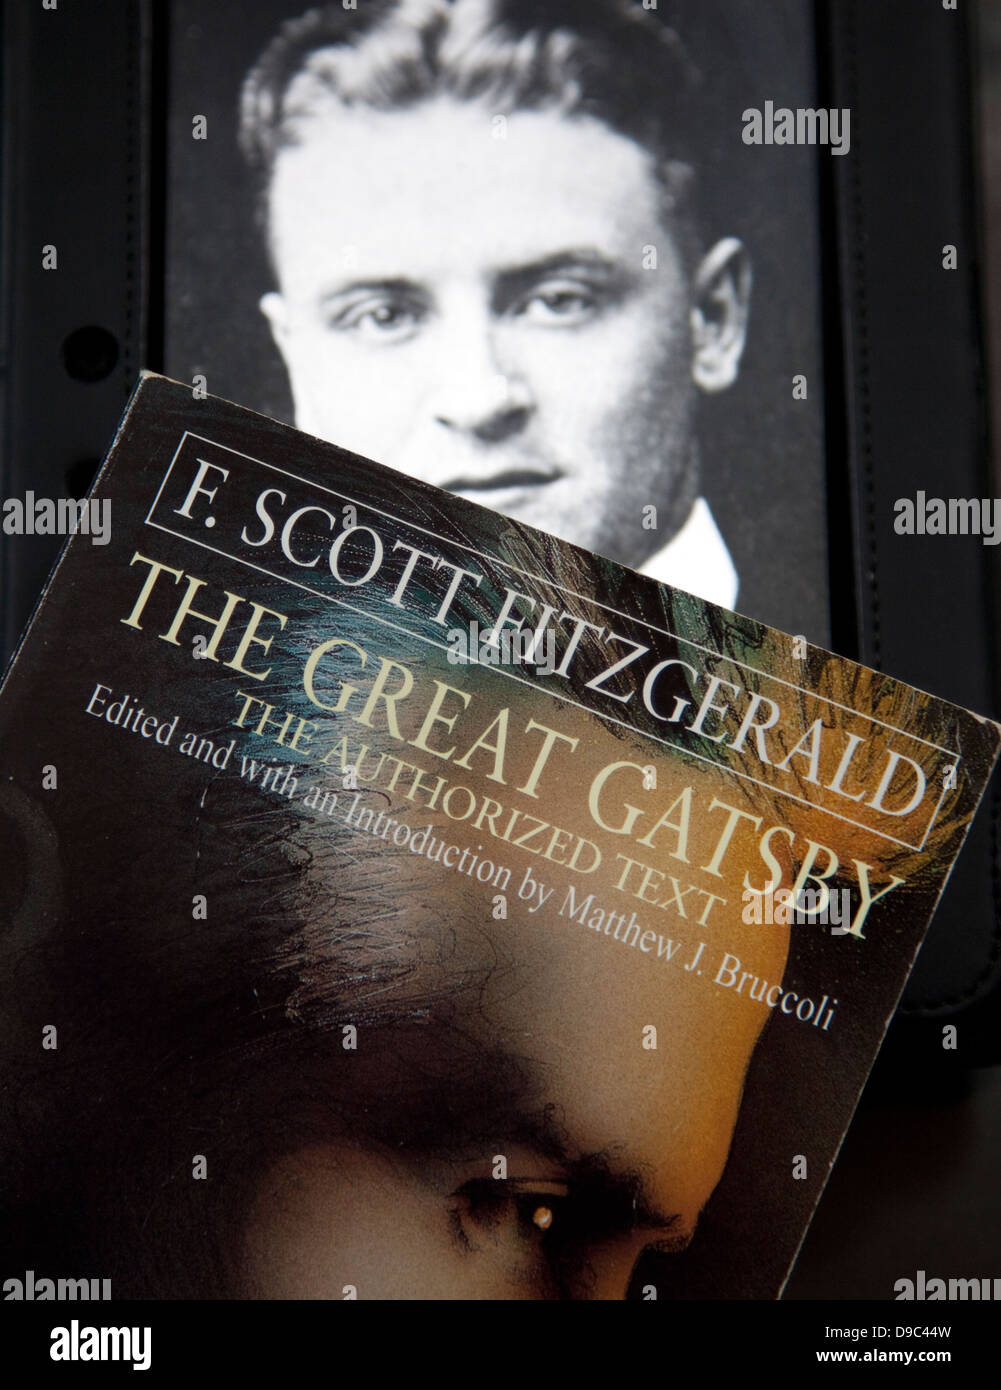 1990s paperback edition of The Great Gatsby and portrait of F Scott Fitzgerald, London Stock Photo